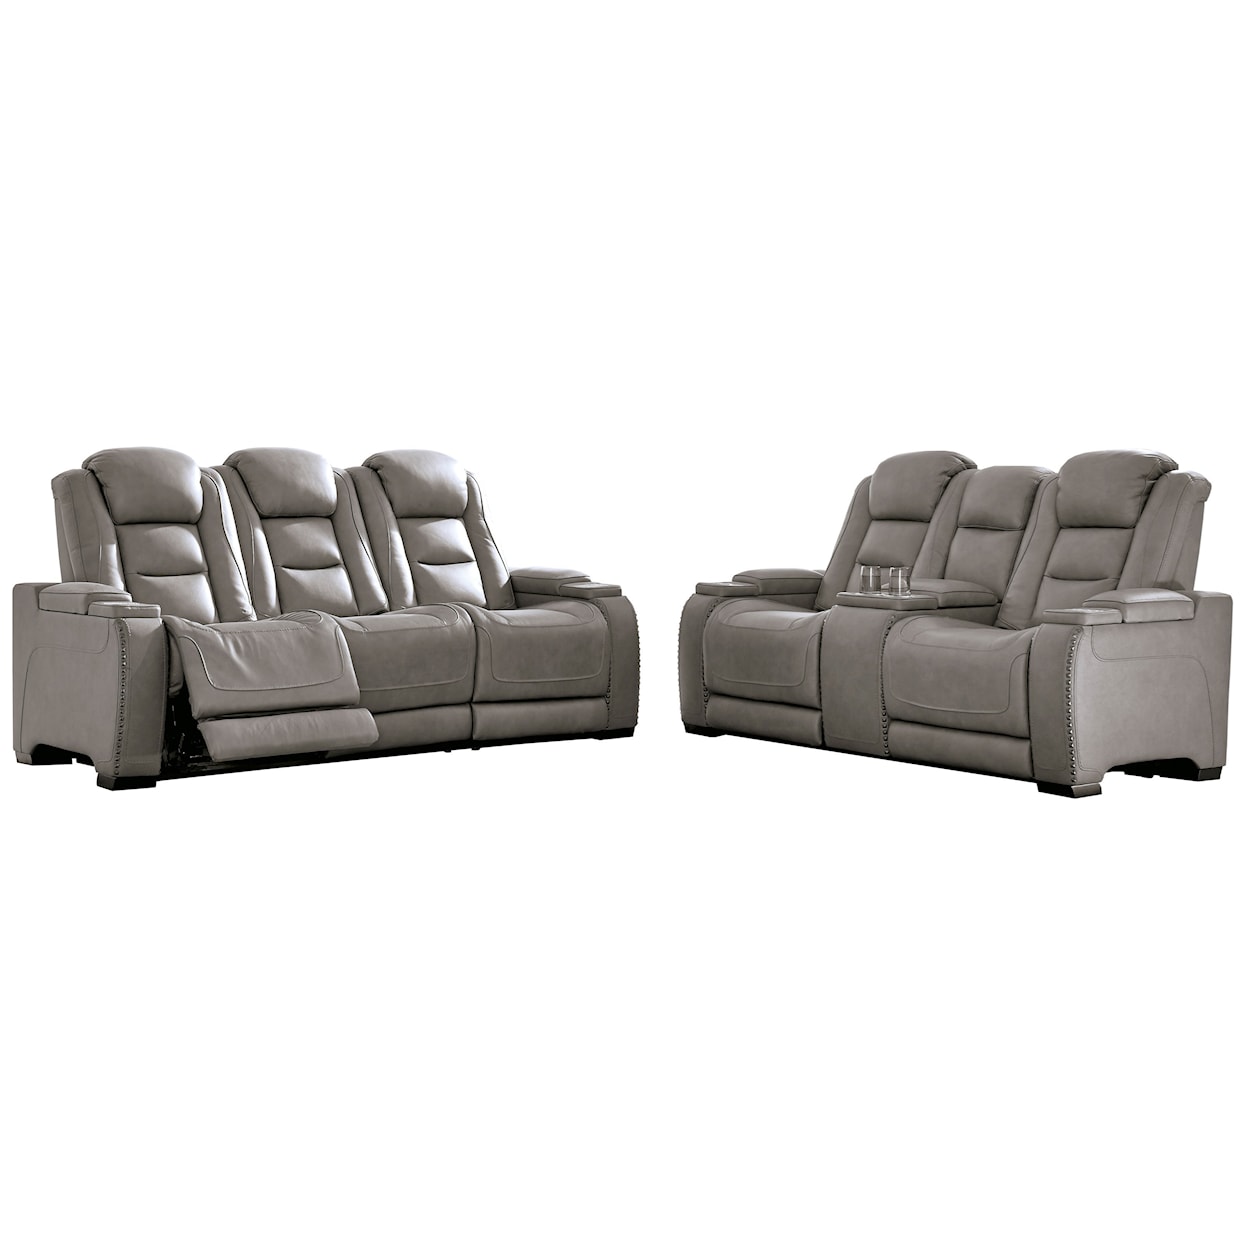 Signature Design by Ashley Furniture The Man-Den Reclining Living Room Group